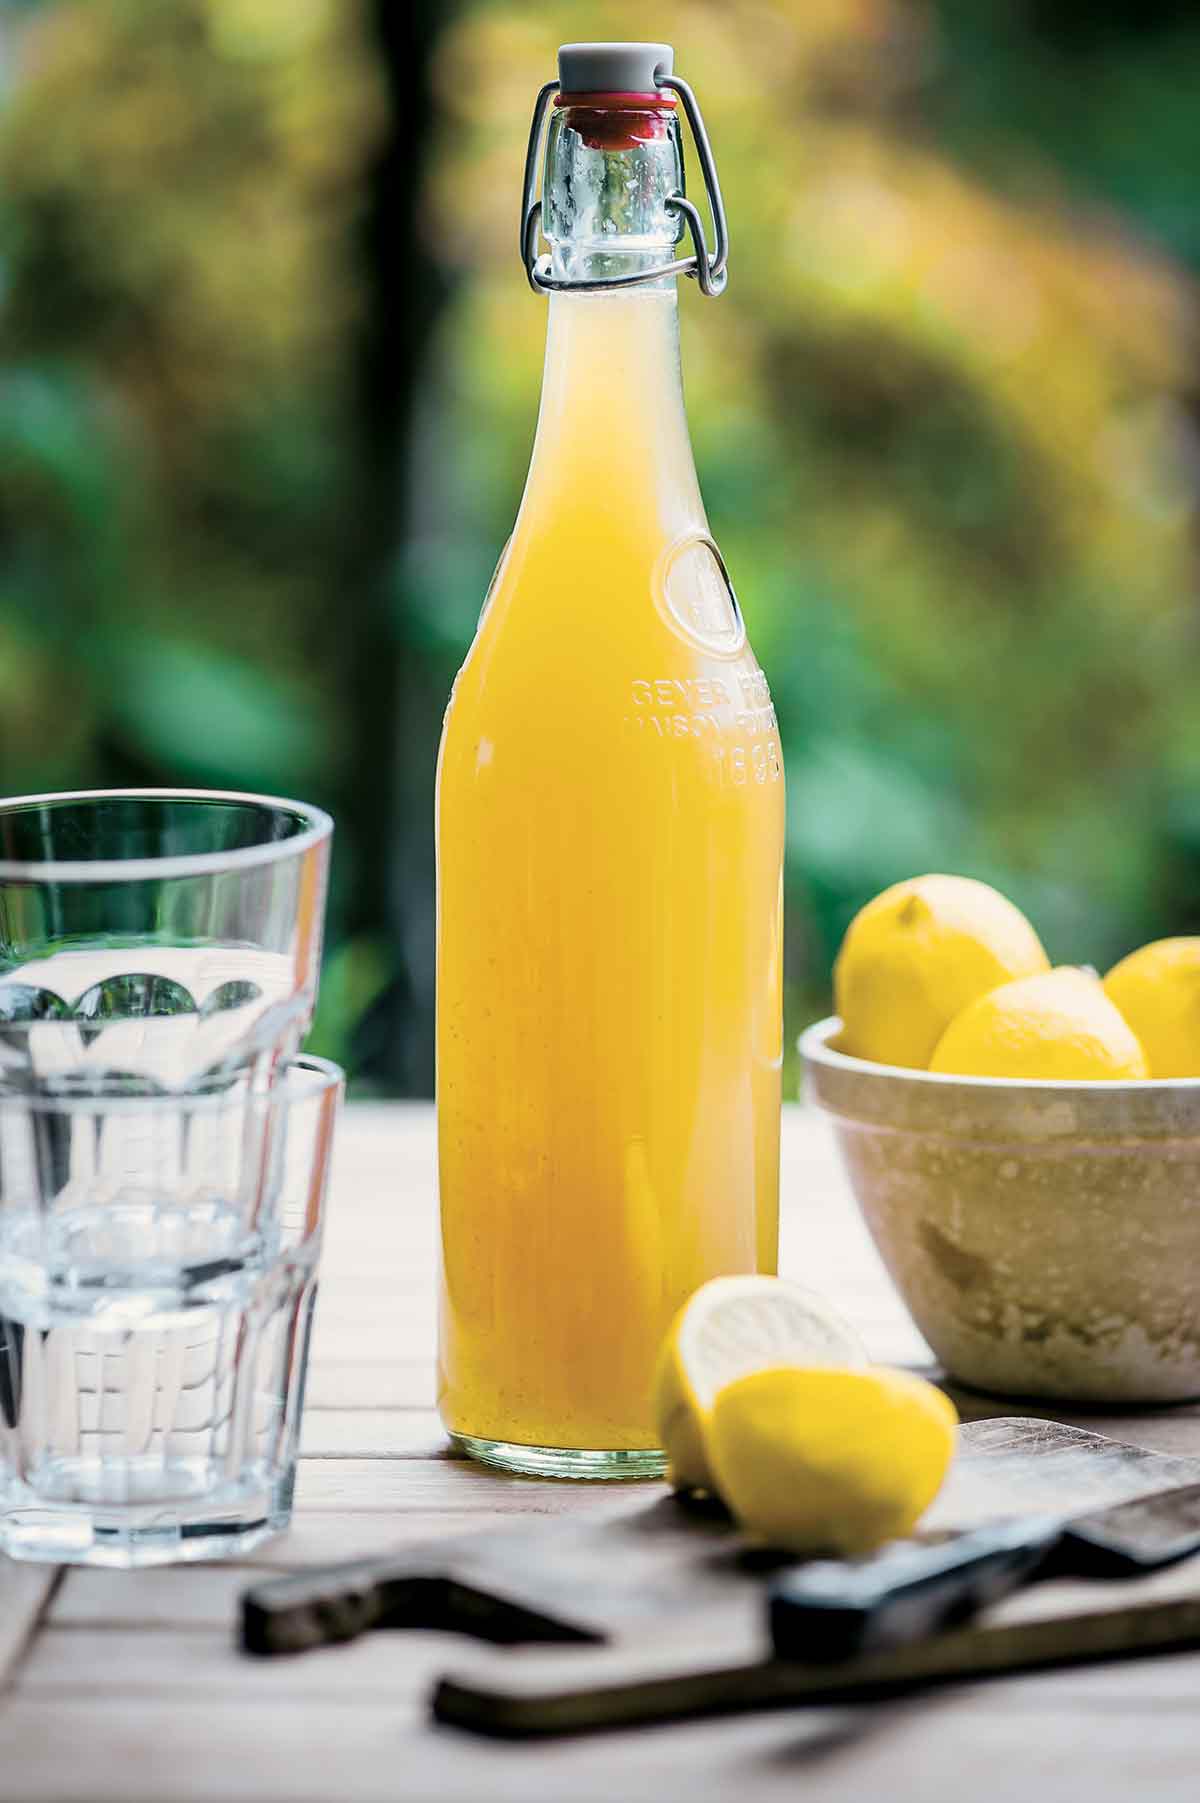 A glass bottle filled with homemade lemonade syrup, a bowl of lemons, and two glasses on a wooden table.